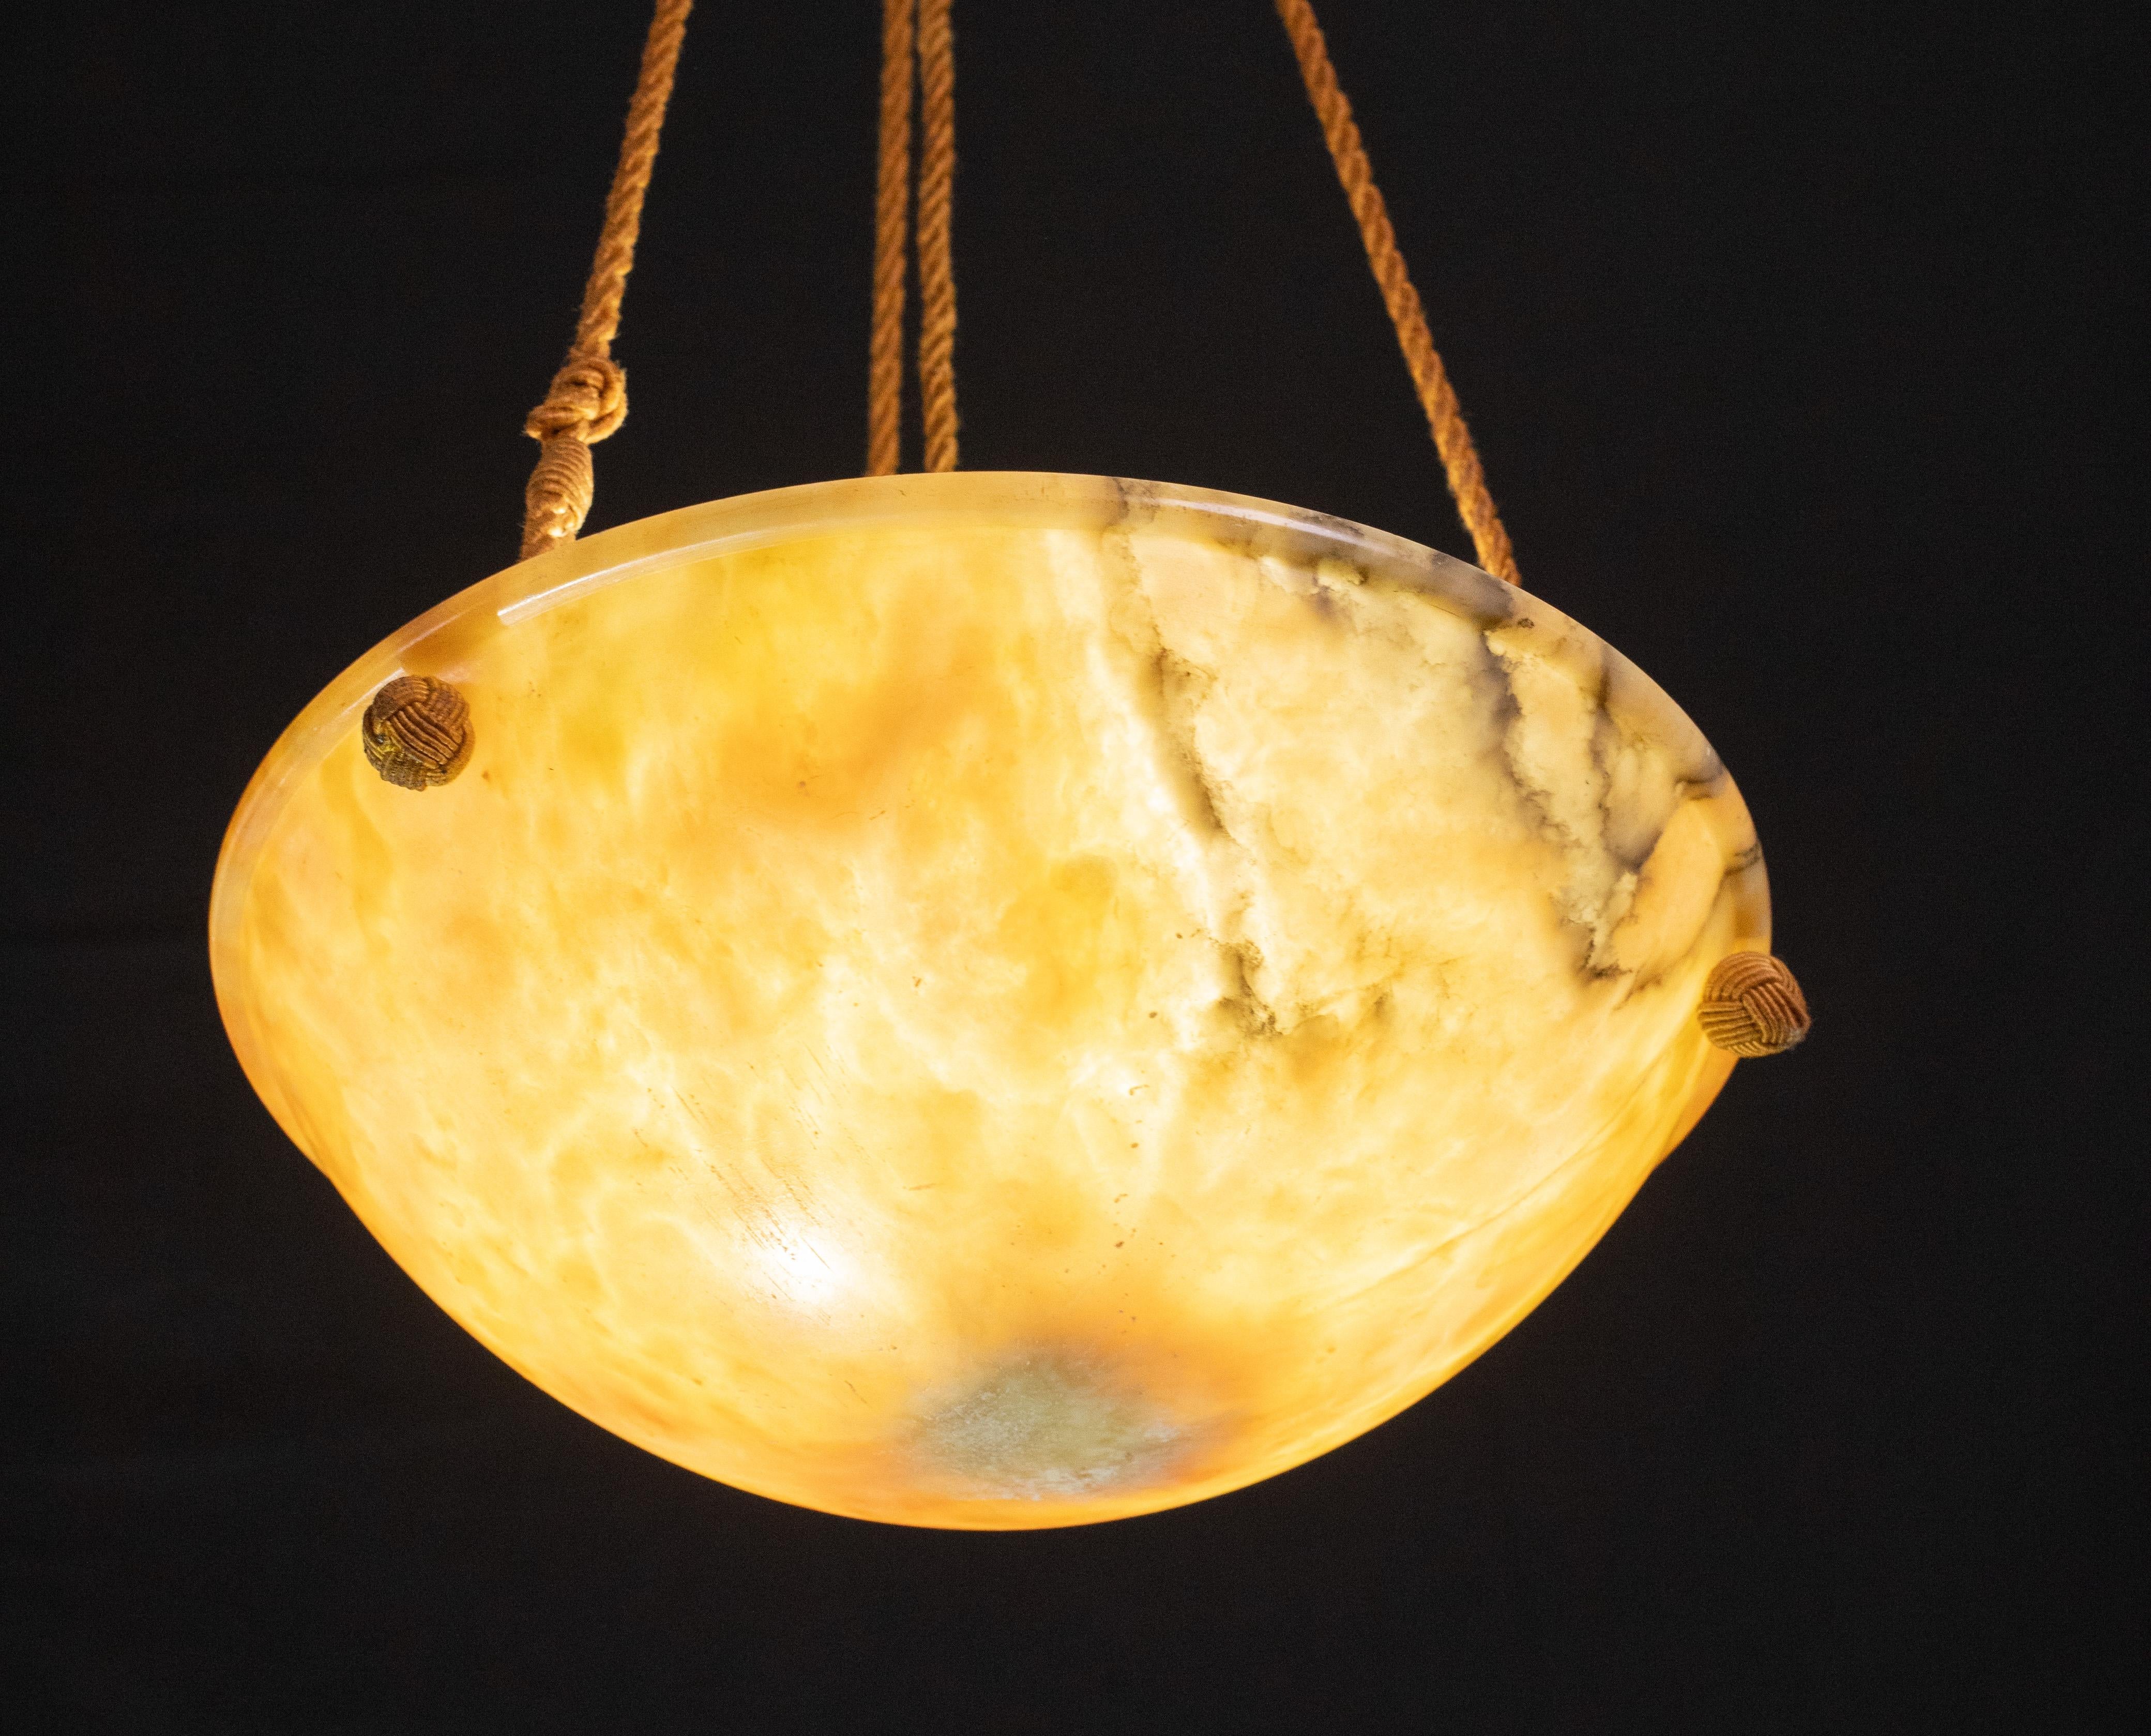 Antique orange alabaster hanging chandelier in Art Deco style, circa 1950s.
A unique piece of orange alabaster, beautifully worked with hues and reflections of other colors when lit, suspended by three strings (wires).
The light that shines through